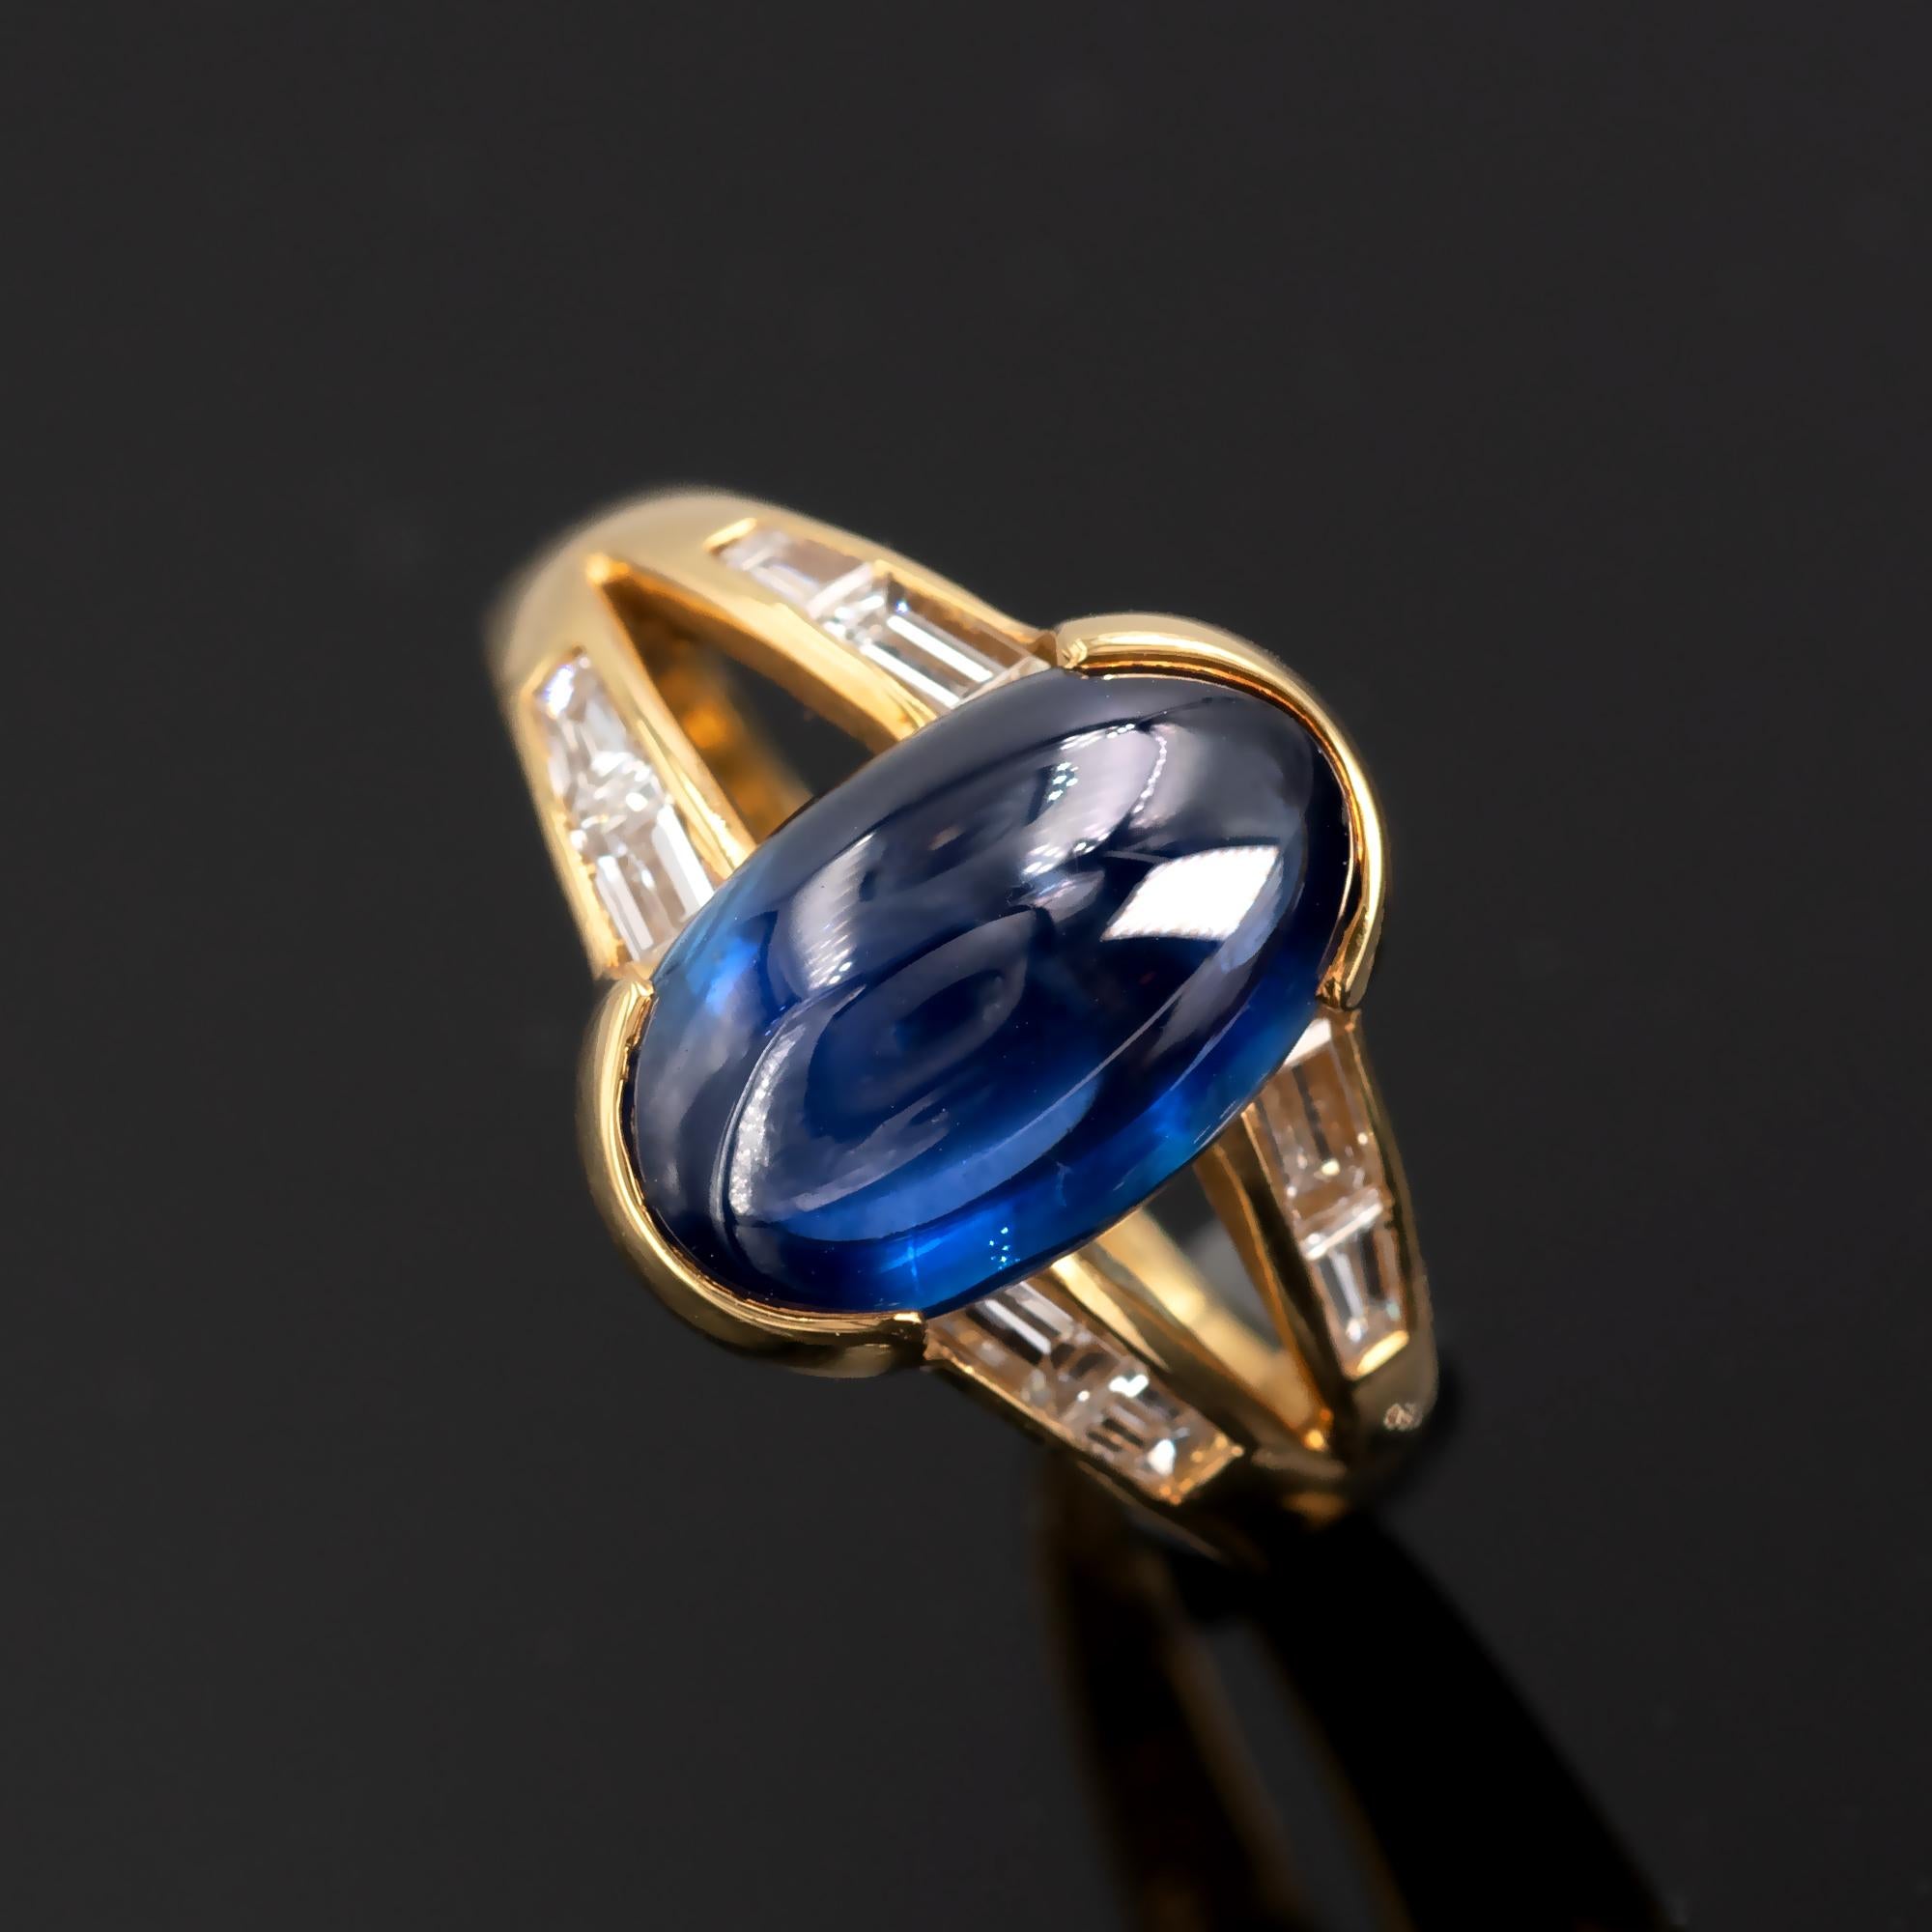 A modern 18-karat plain gold ring set with a 12 x 7.6 m cabochon cut sapphire and baguette cut diamonds. The very modern design has been influenced by the art-deco pure lines.

The sapphire is intense blue with an excellent transparency. It weighs